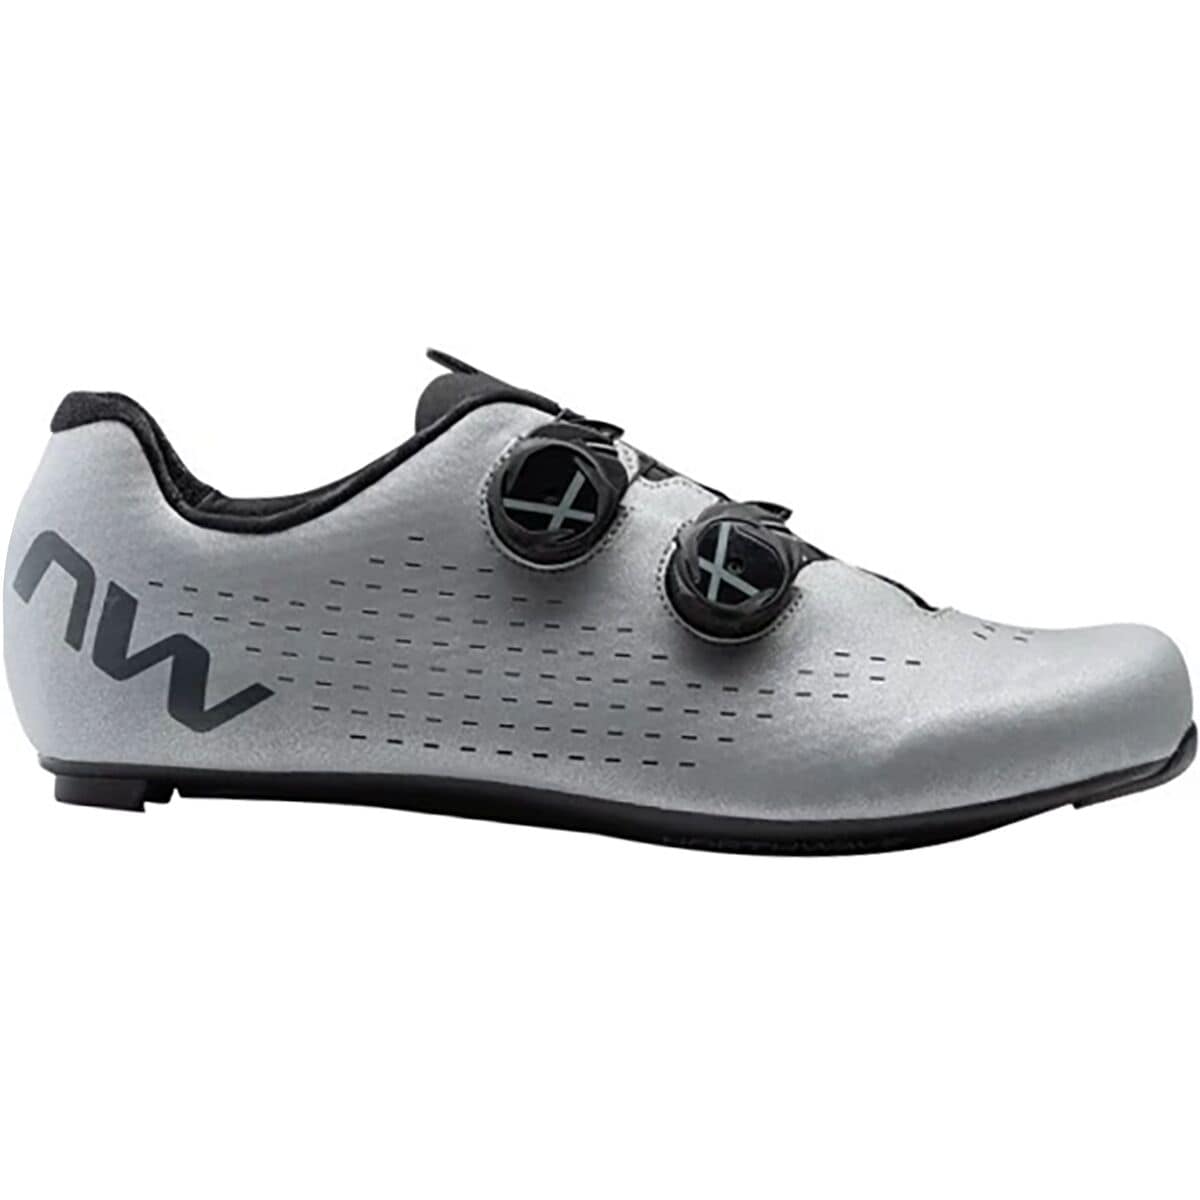 Northwave Revolution 3 Cycling Shoe - Men's Silver Reflective, 39.0